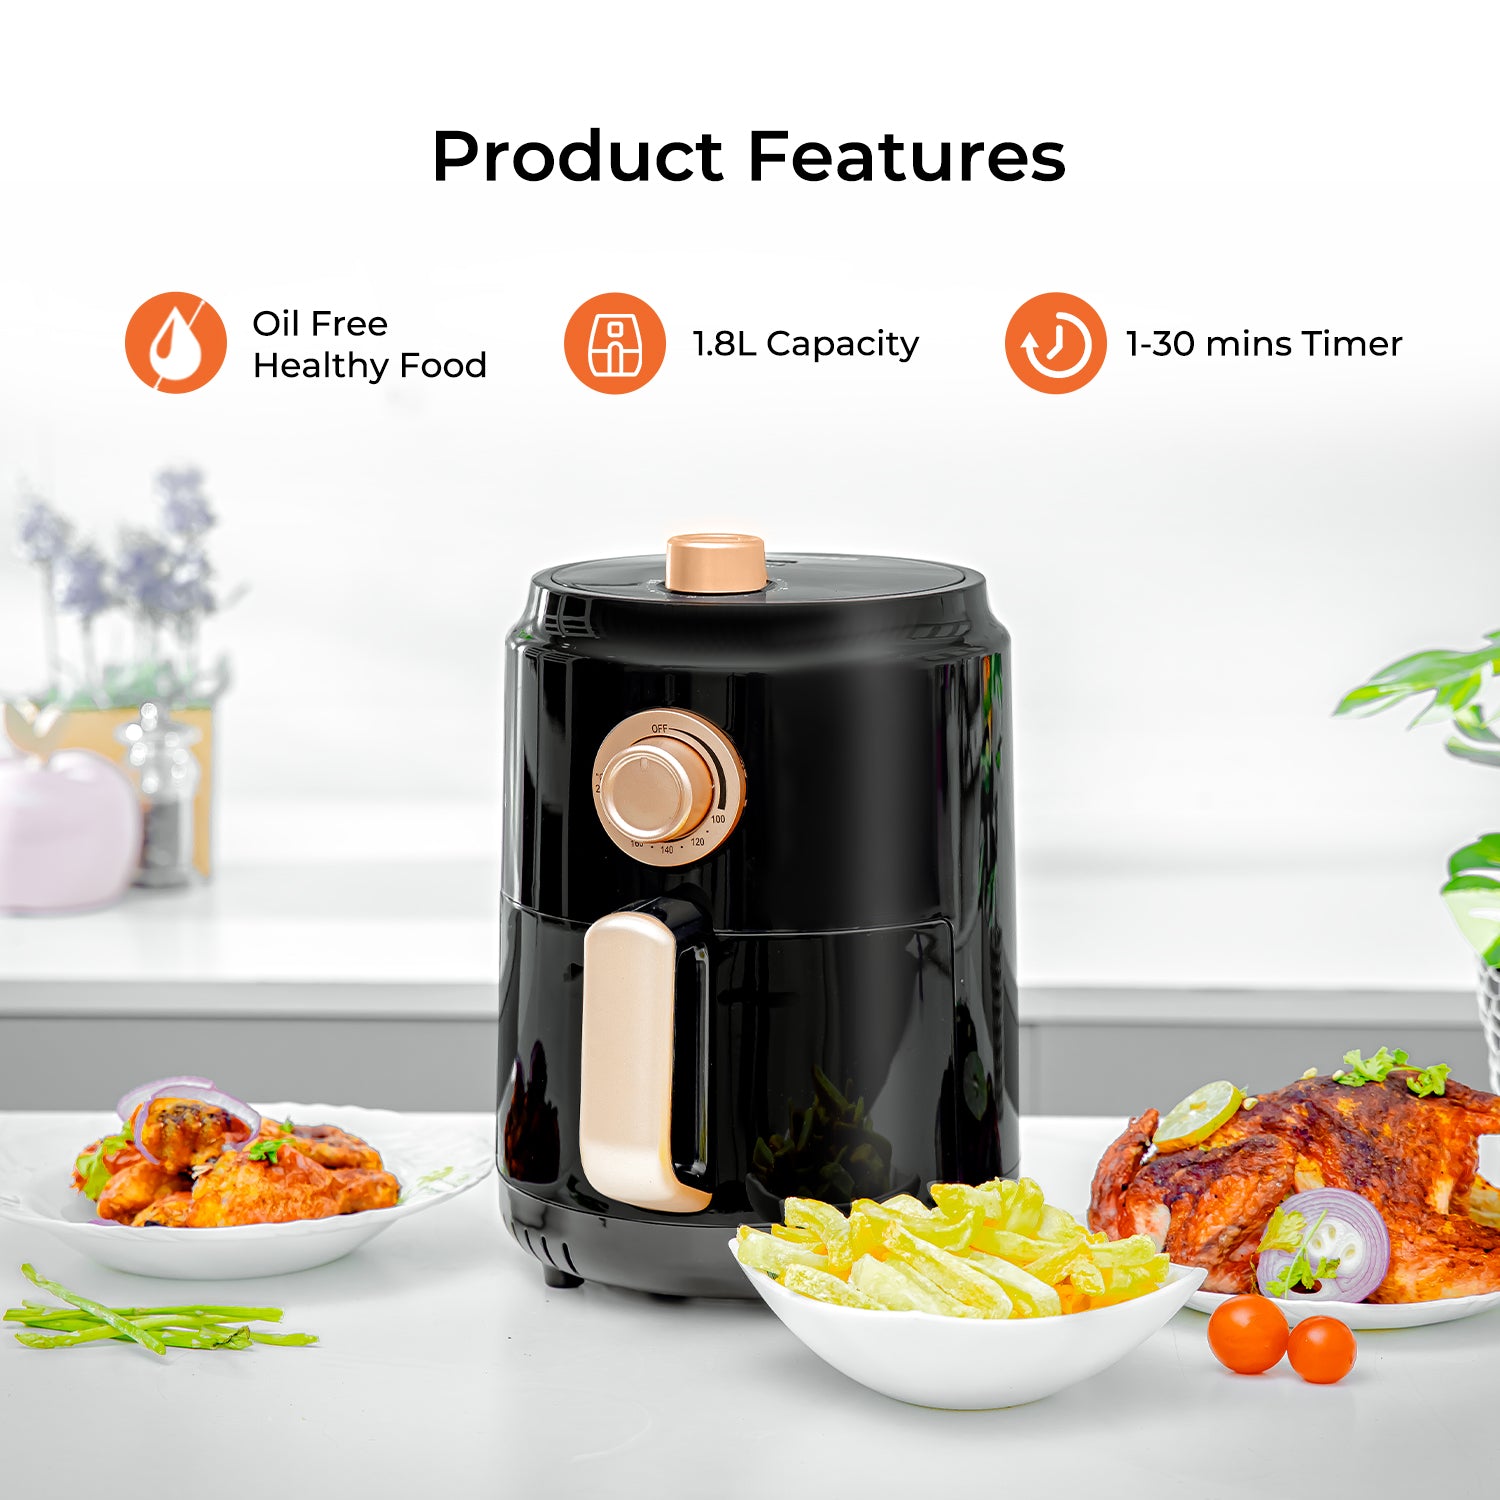 4-Piece Kitchen Bundle - Kettle, Toaster, Frying Pan and Air Fryer